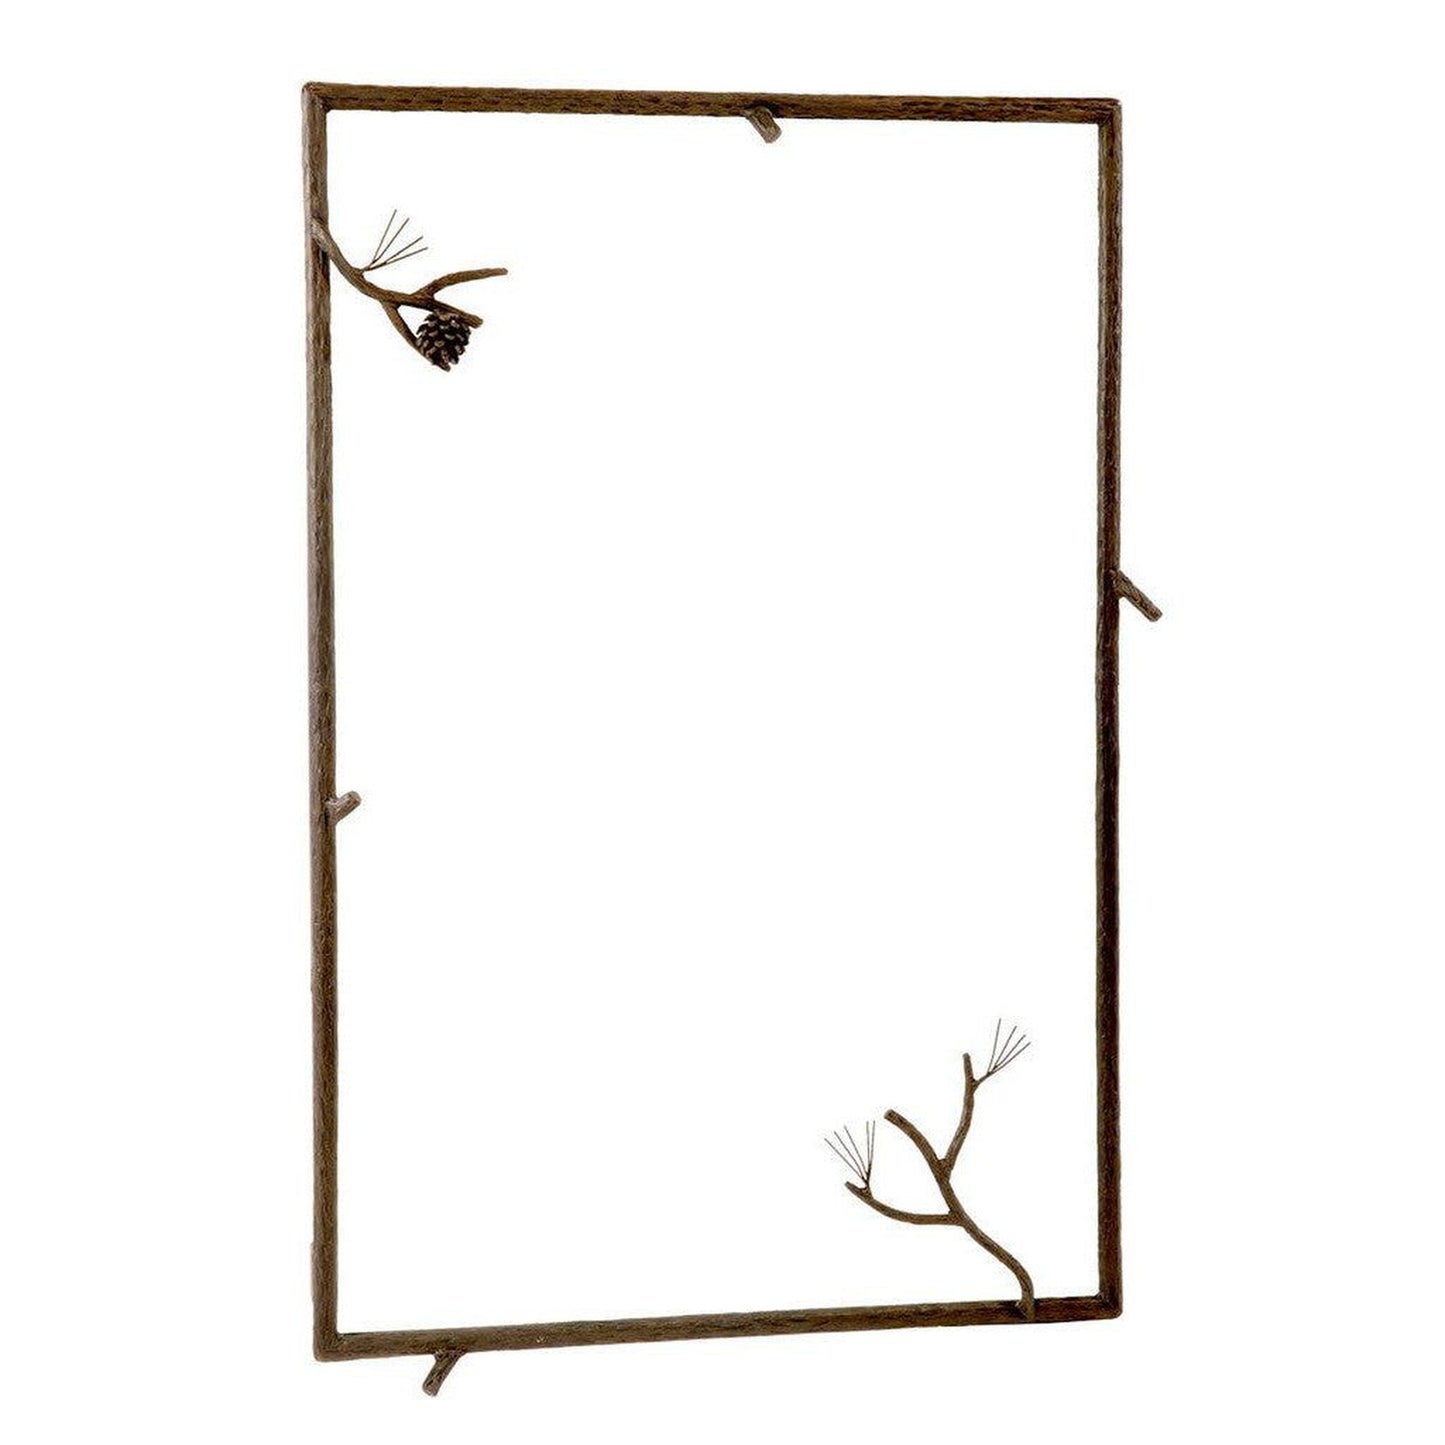 Stone County Ironworks Pine 37" x 25" Large Natural Bark Iron Wall Mirror With Pewter Iron Accent